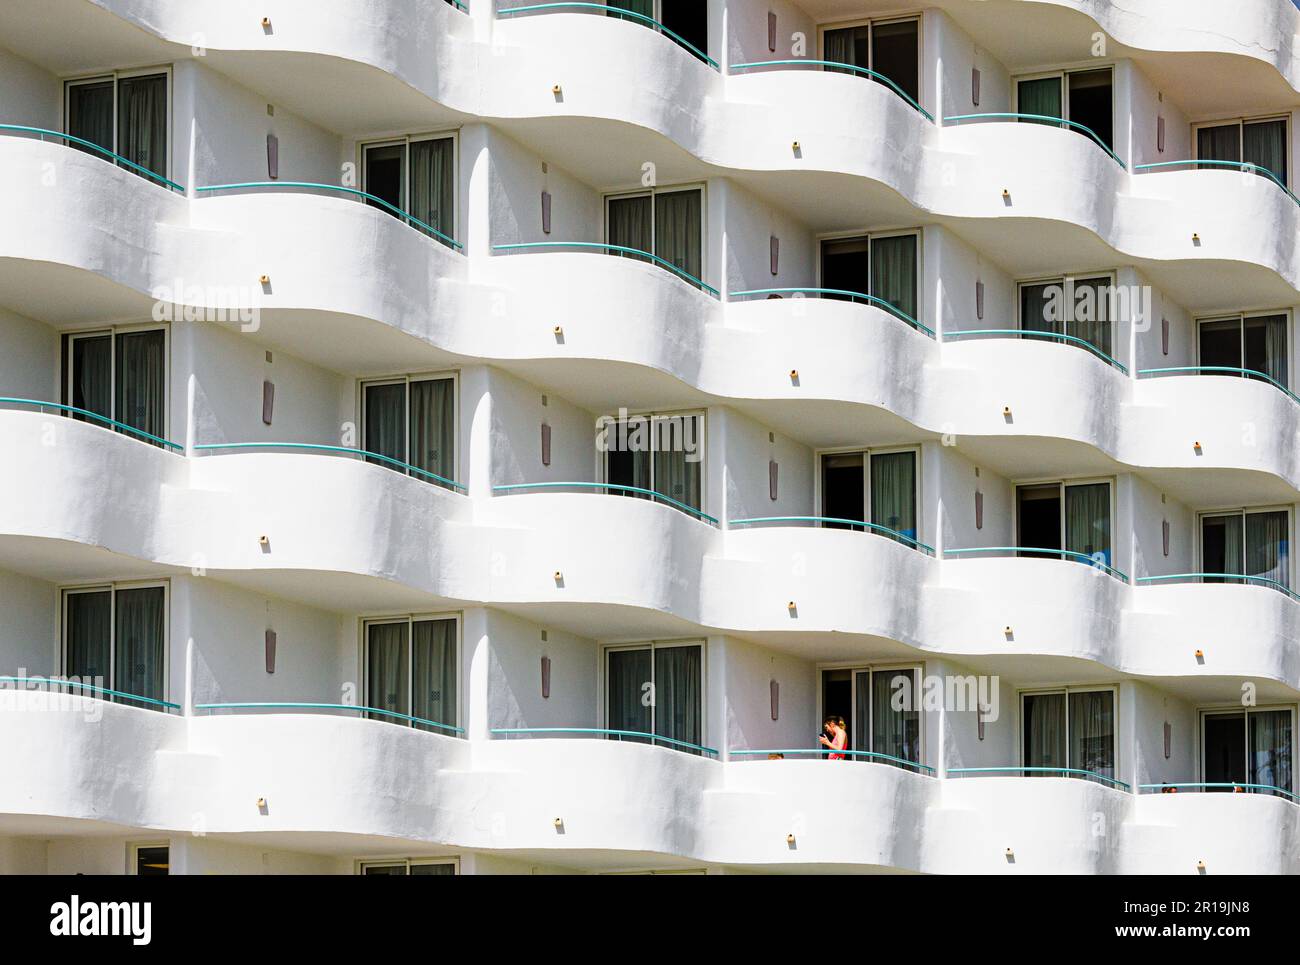 Balconies of holiday apartments in a multistorey hotel in Majorca Spain Stock Photo